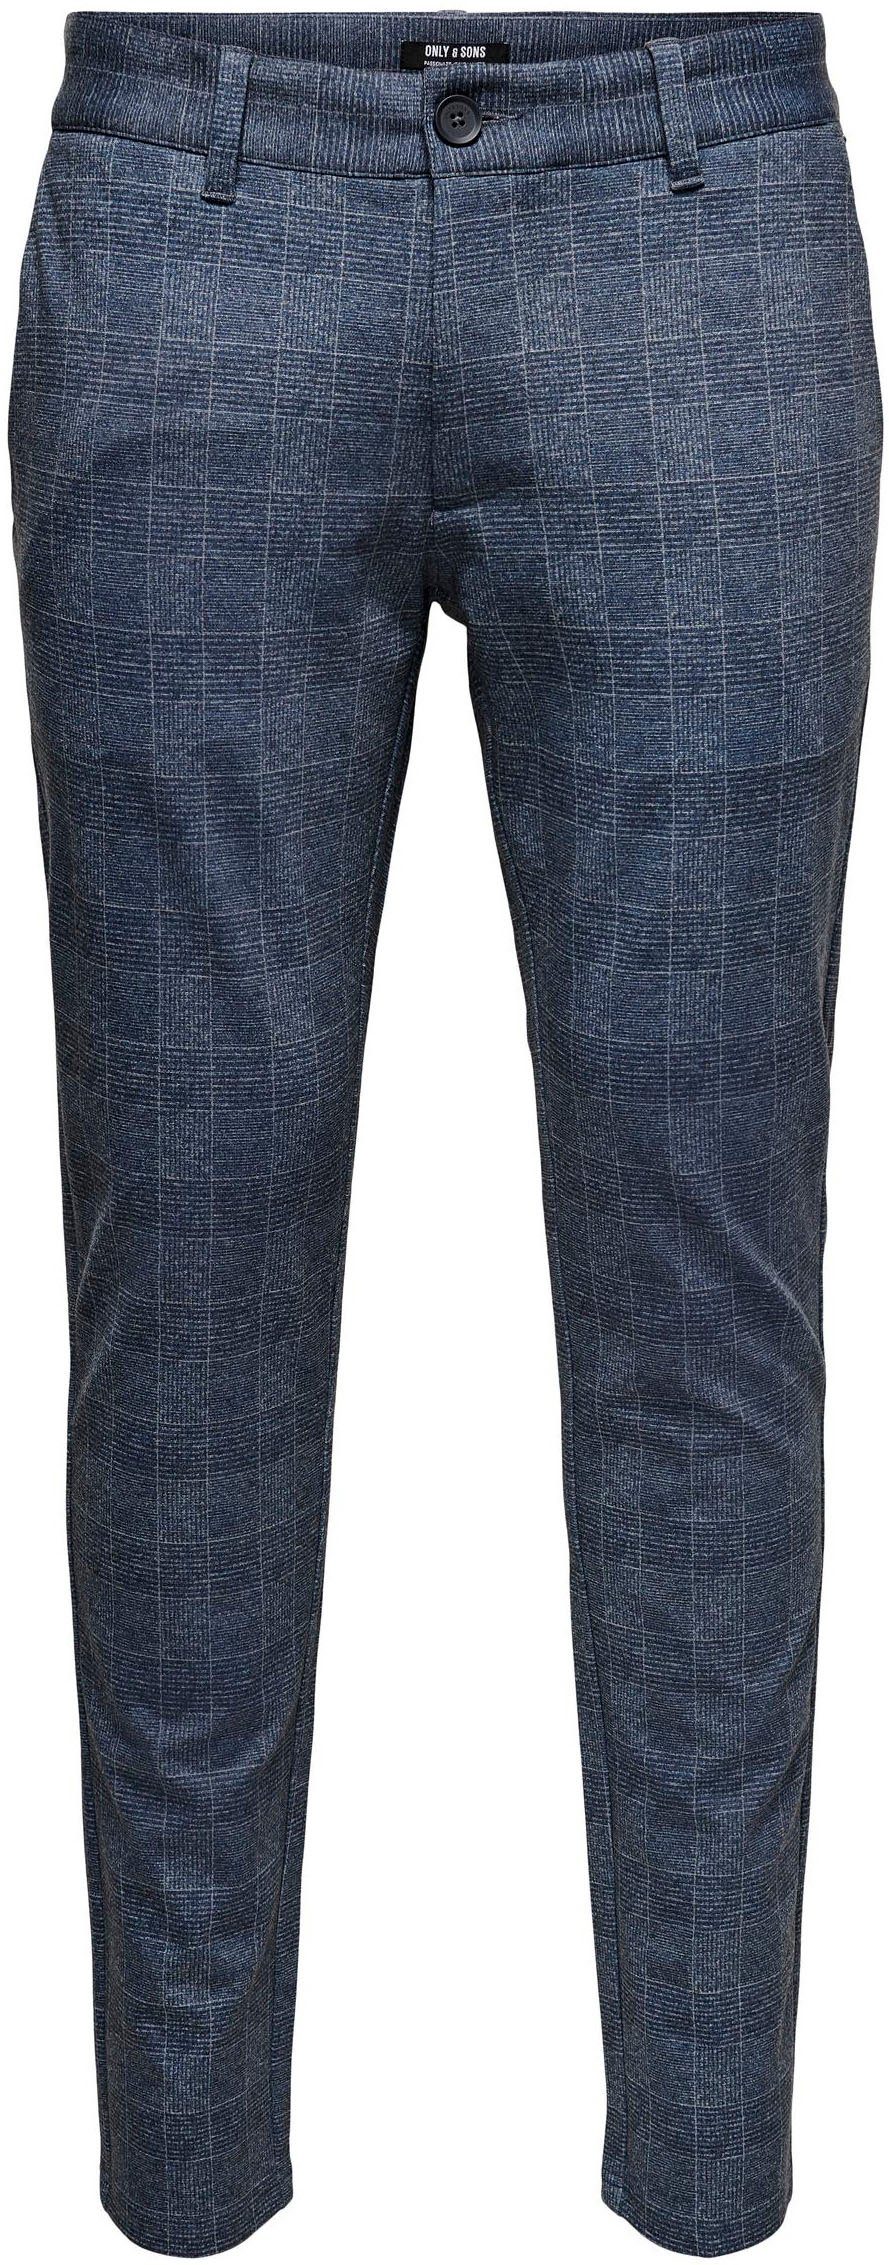 PANTS MARK blau SONS Chinohose ONLY & kariert CHECK